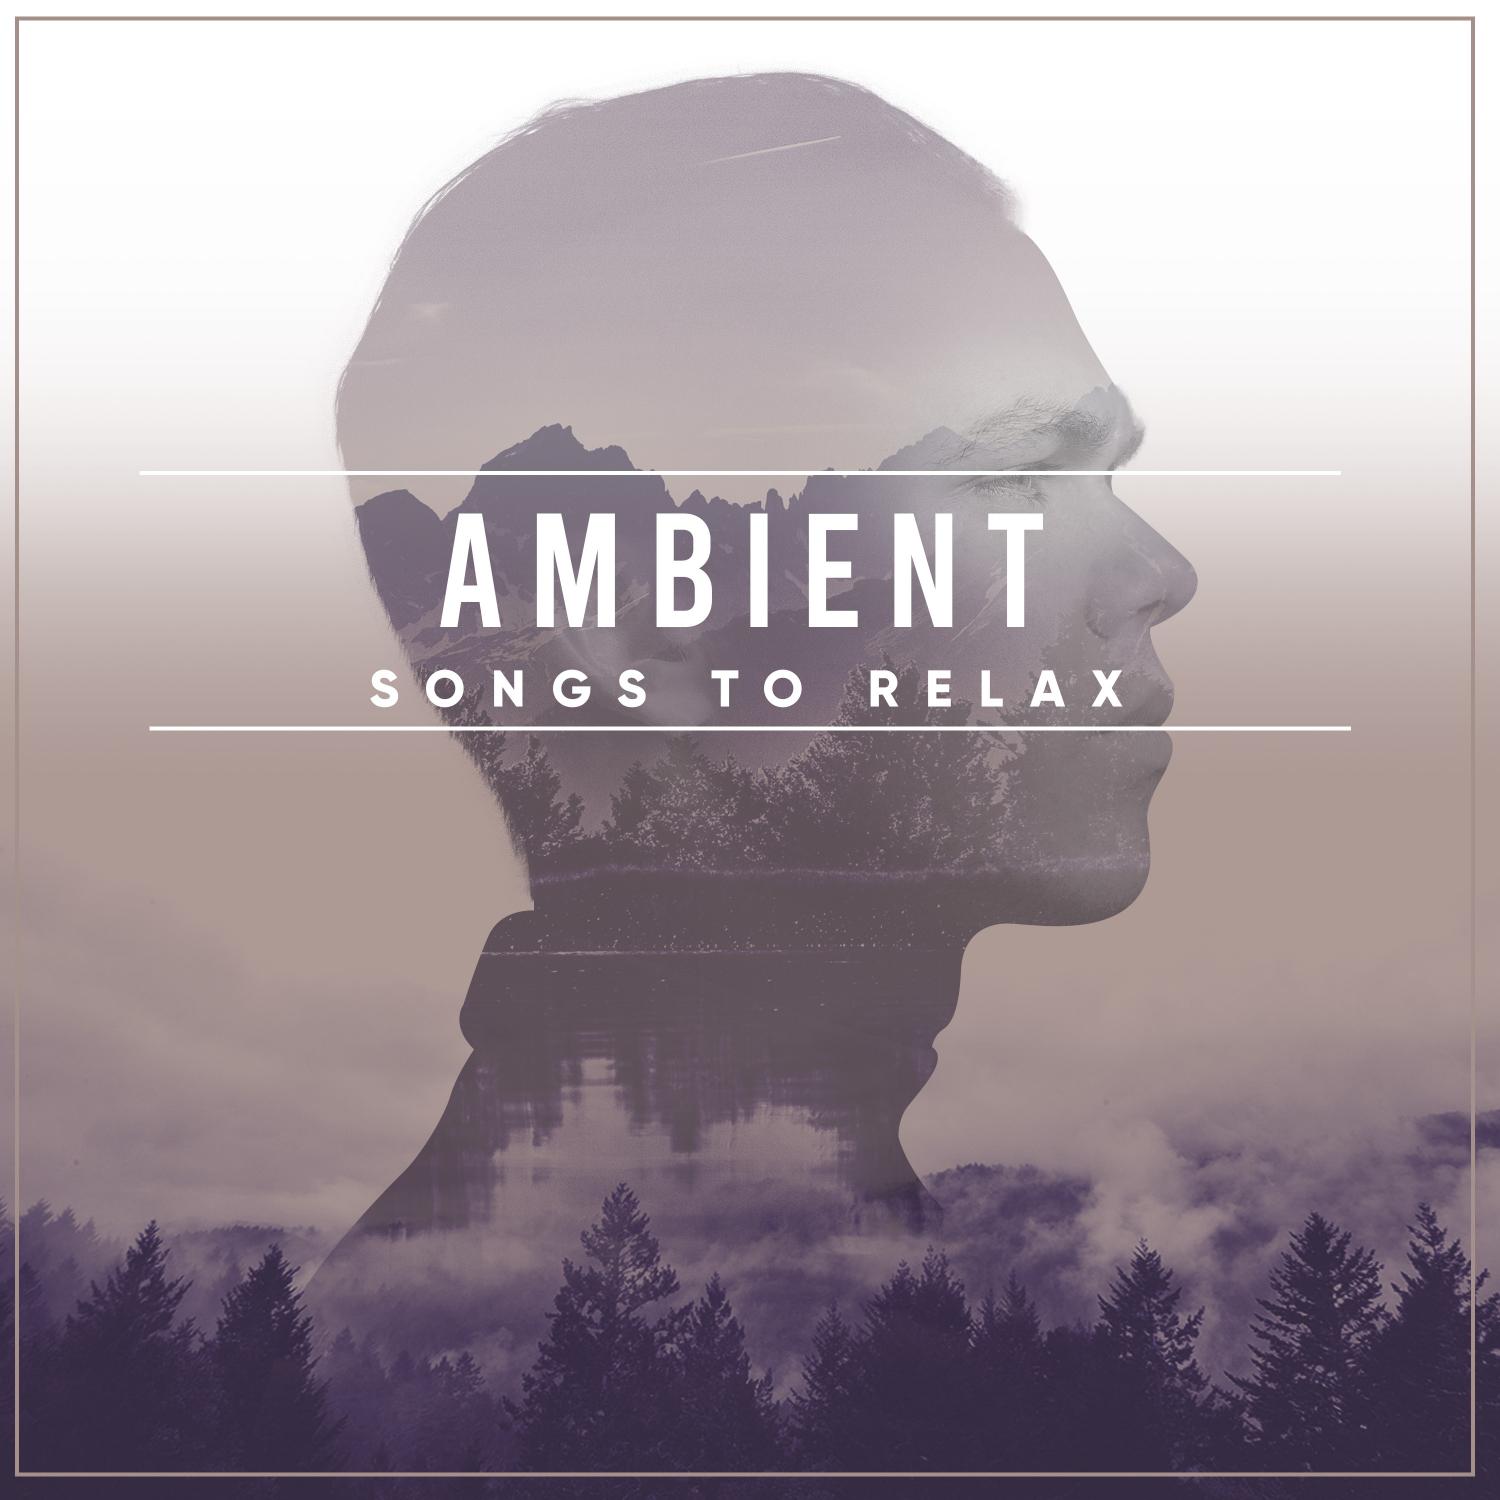 17 Relaxing, Ambient Songs to Relax